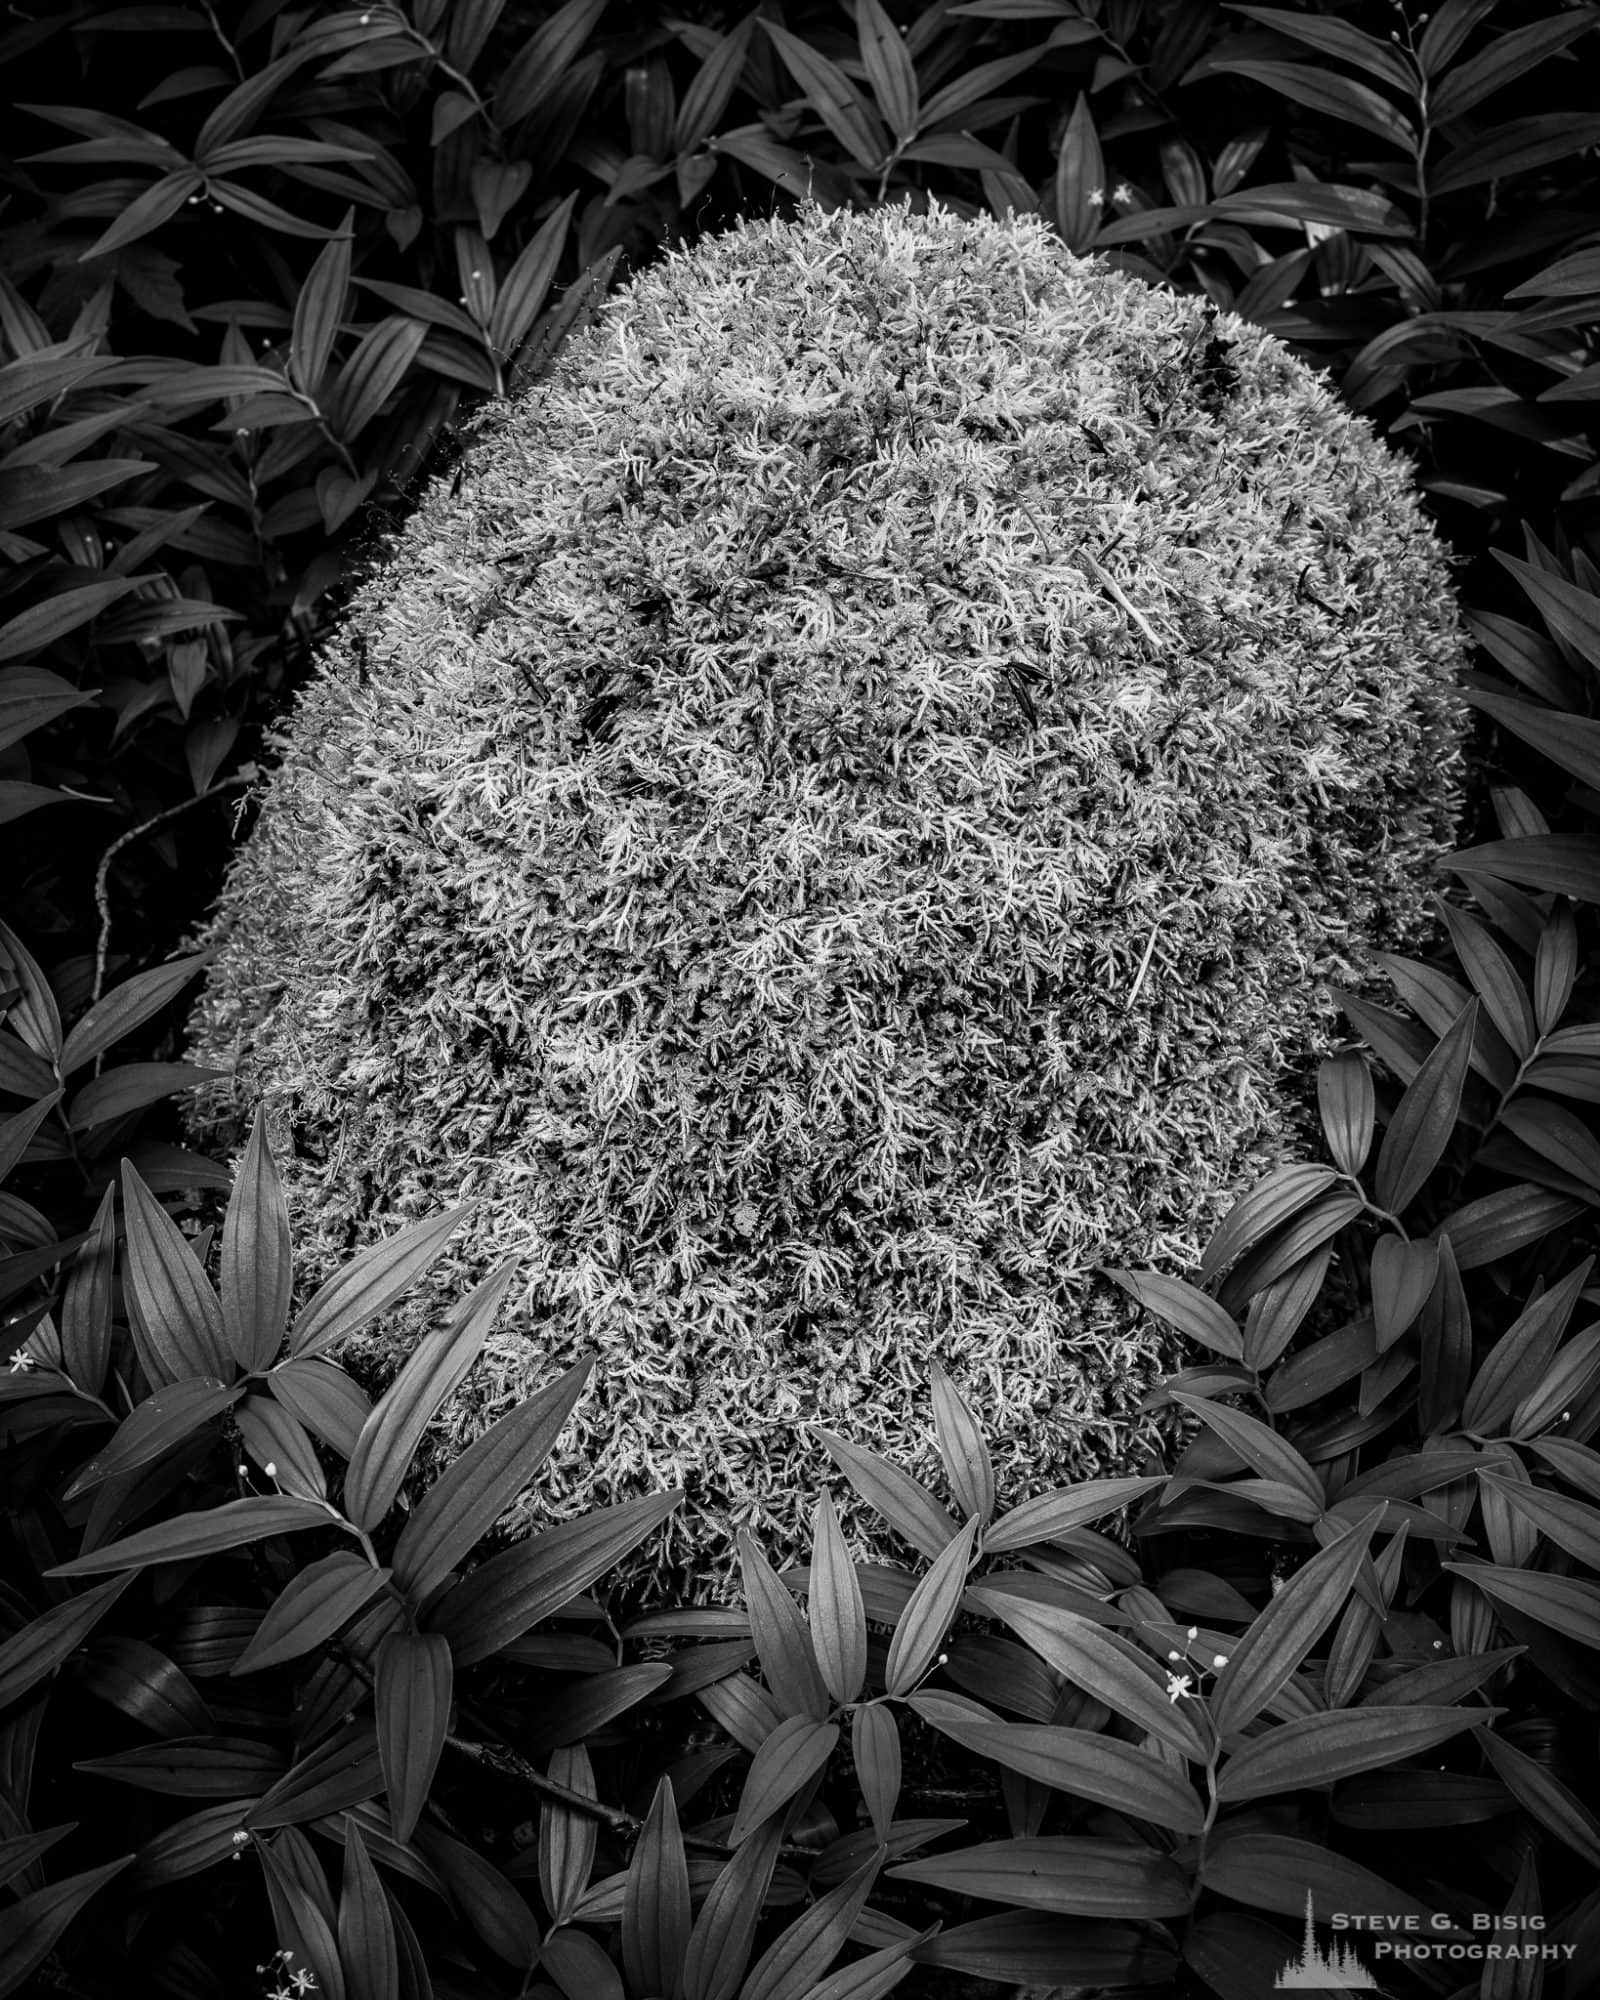 A black and white nature photograph of a moss-covered rock surrounded by Star False Solomon's Seal as found along Forest Road 52 (Skate Creek Road) in the Gifford Pinchot National Forest, Washington.